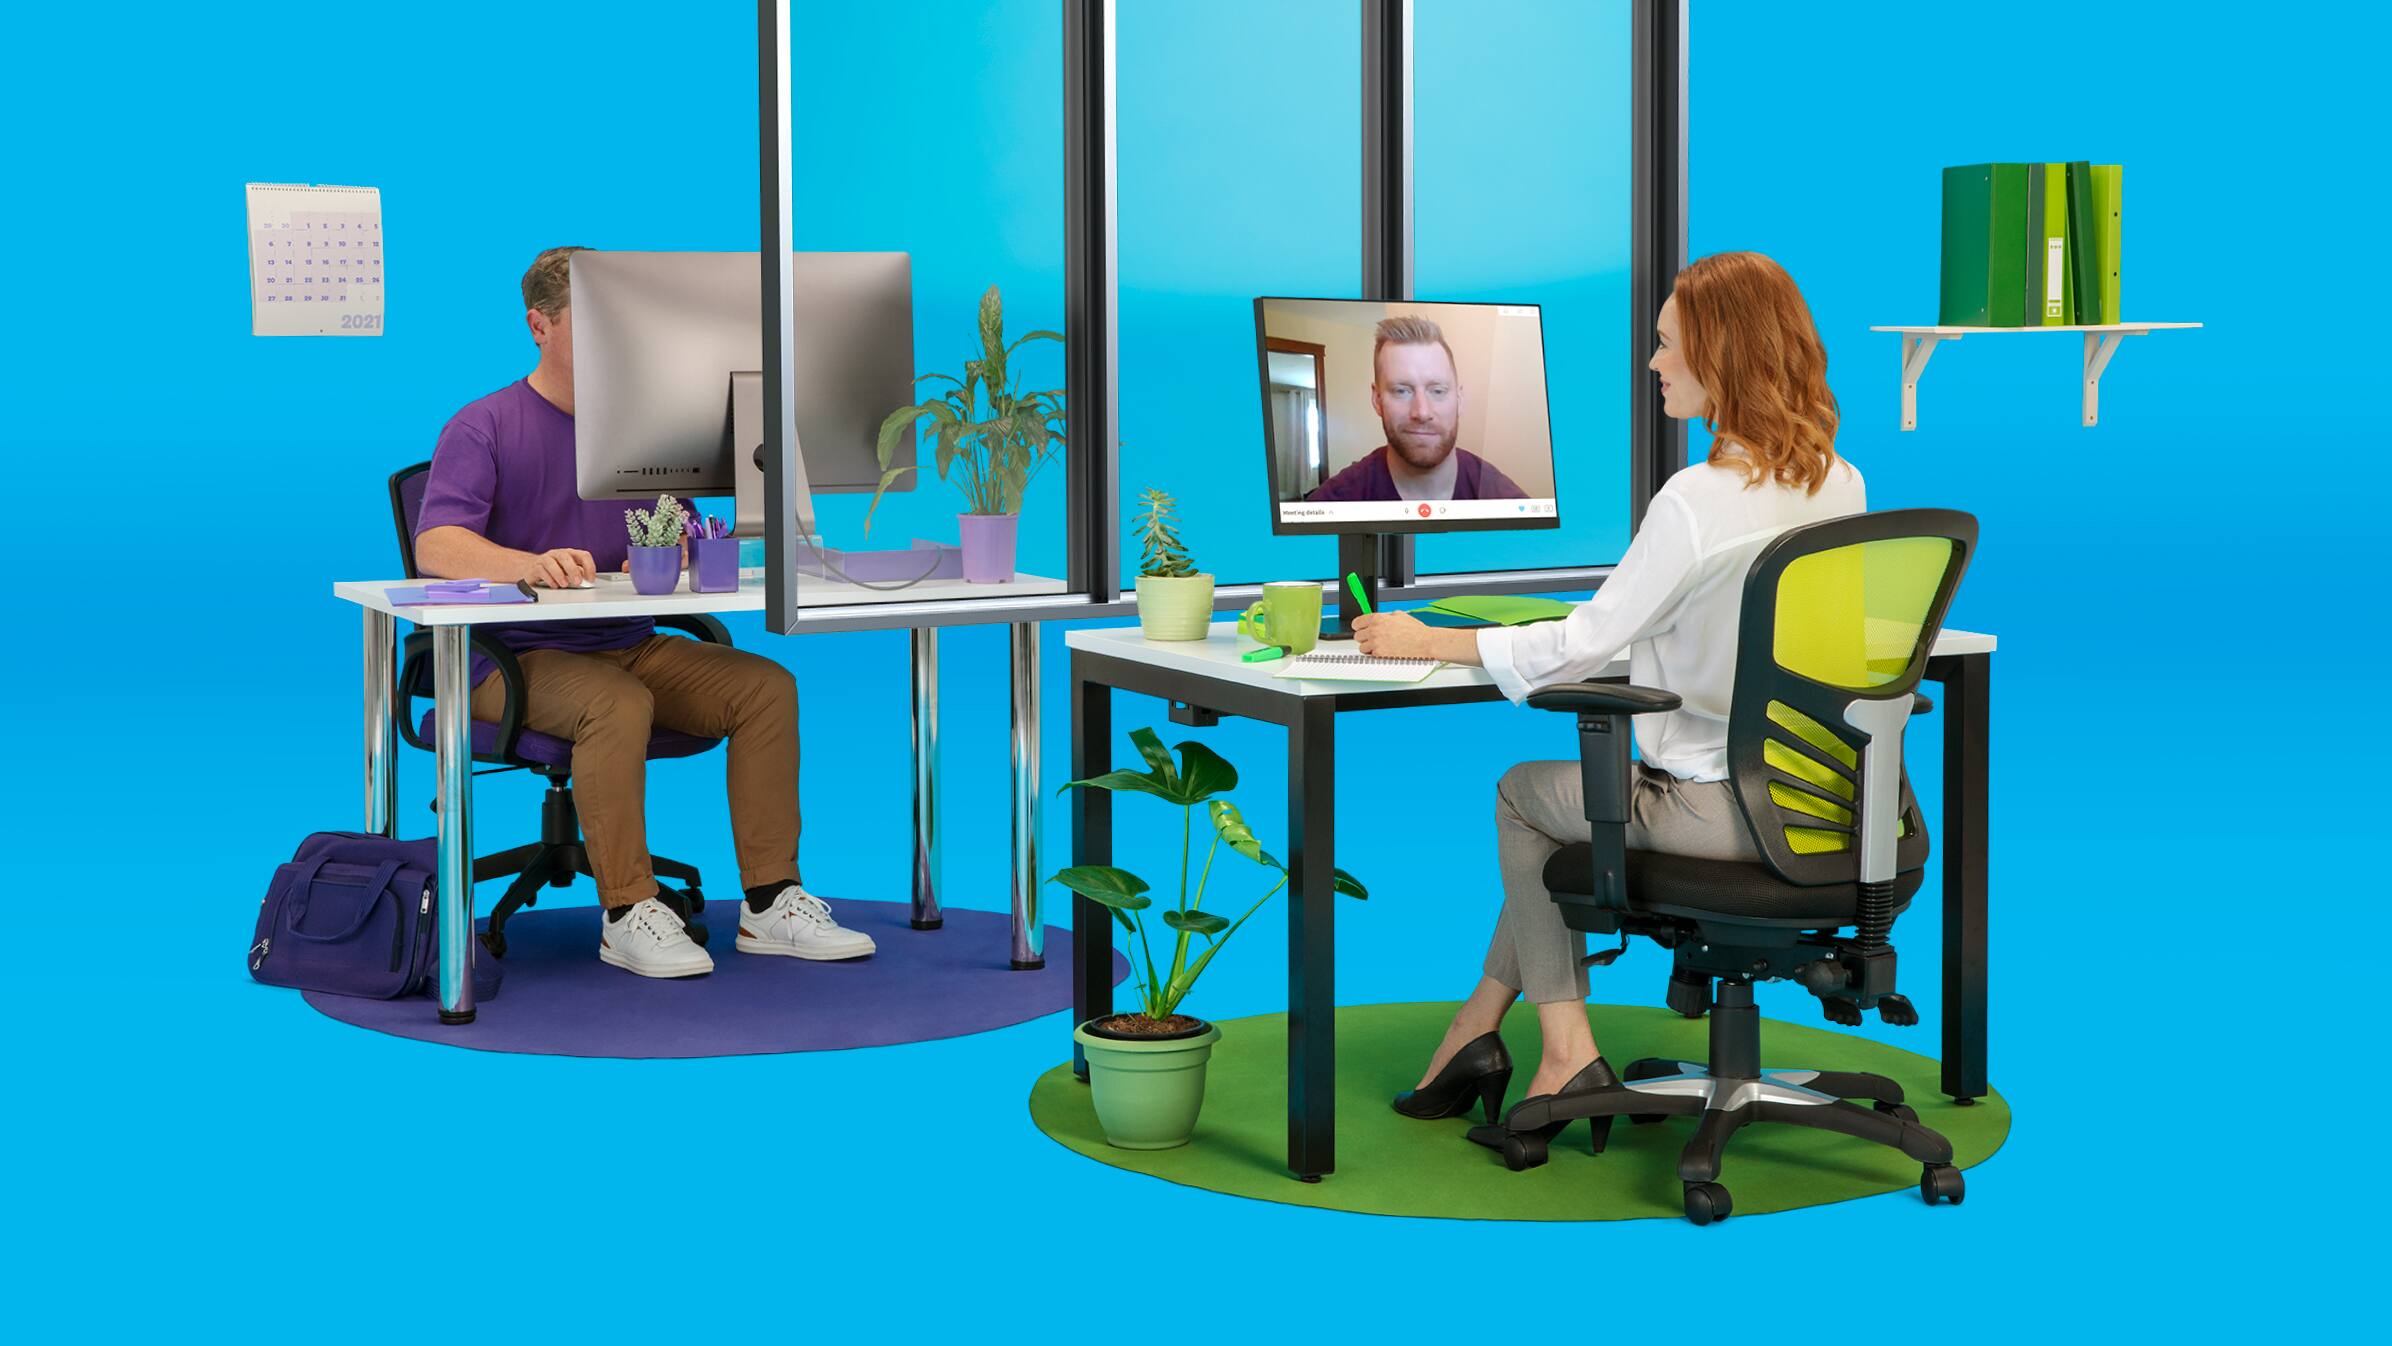 Two people on a blue background work on their desks and computers that sit facing each other.